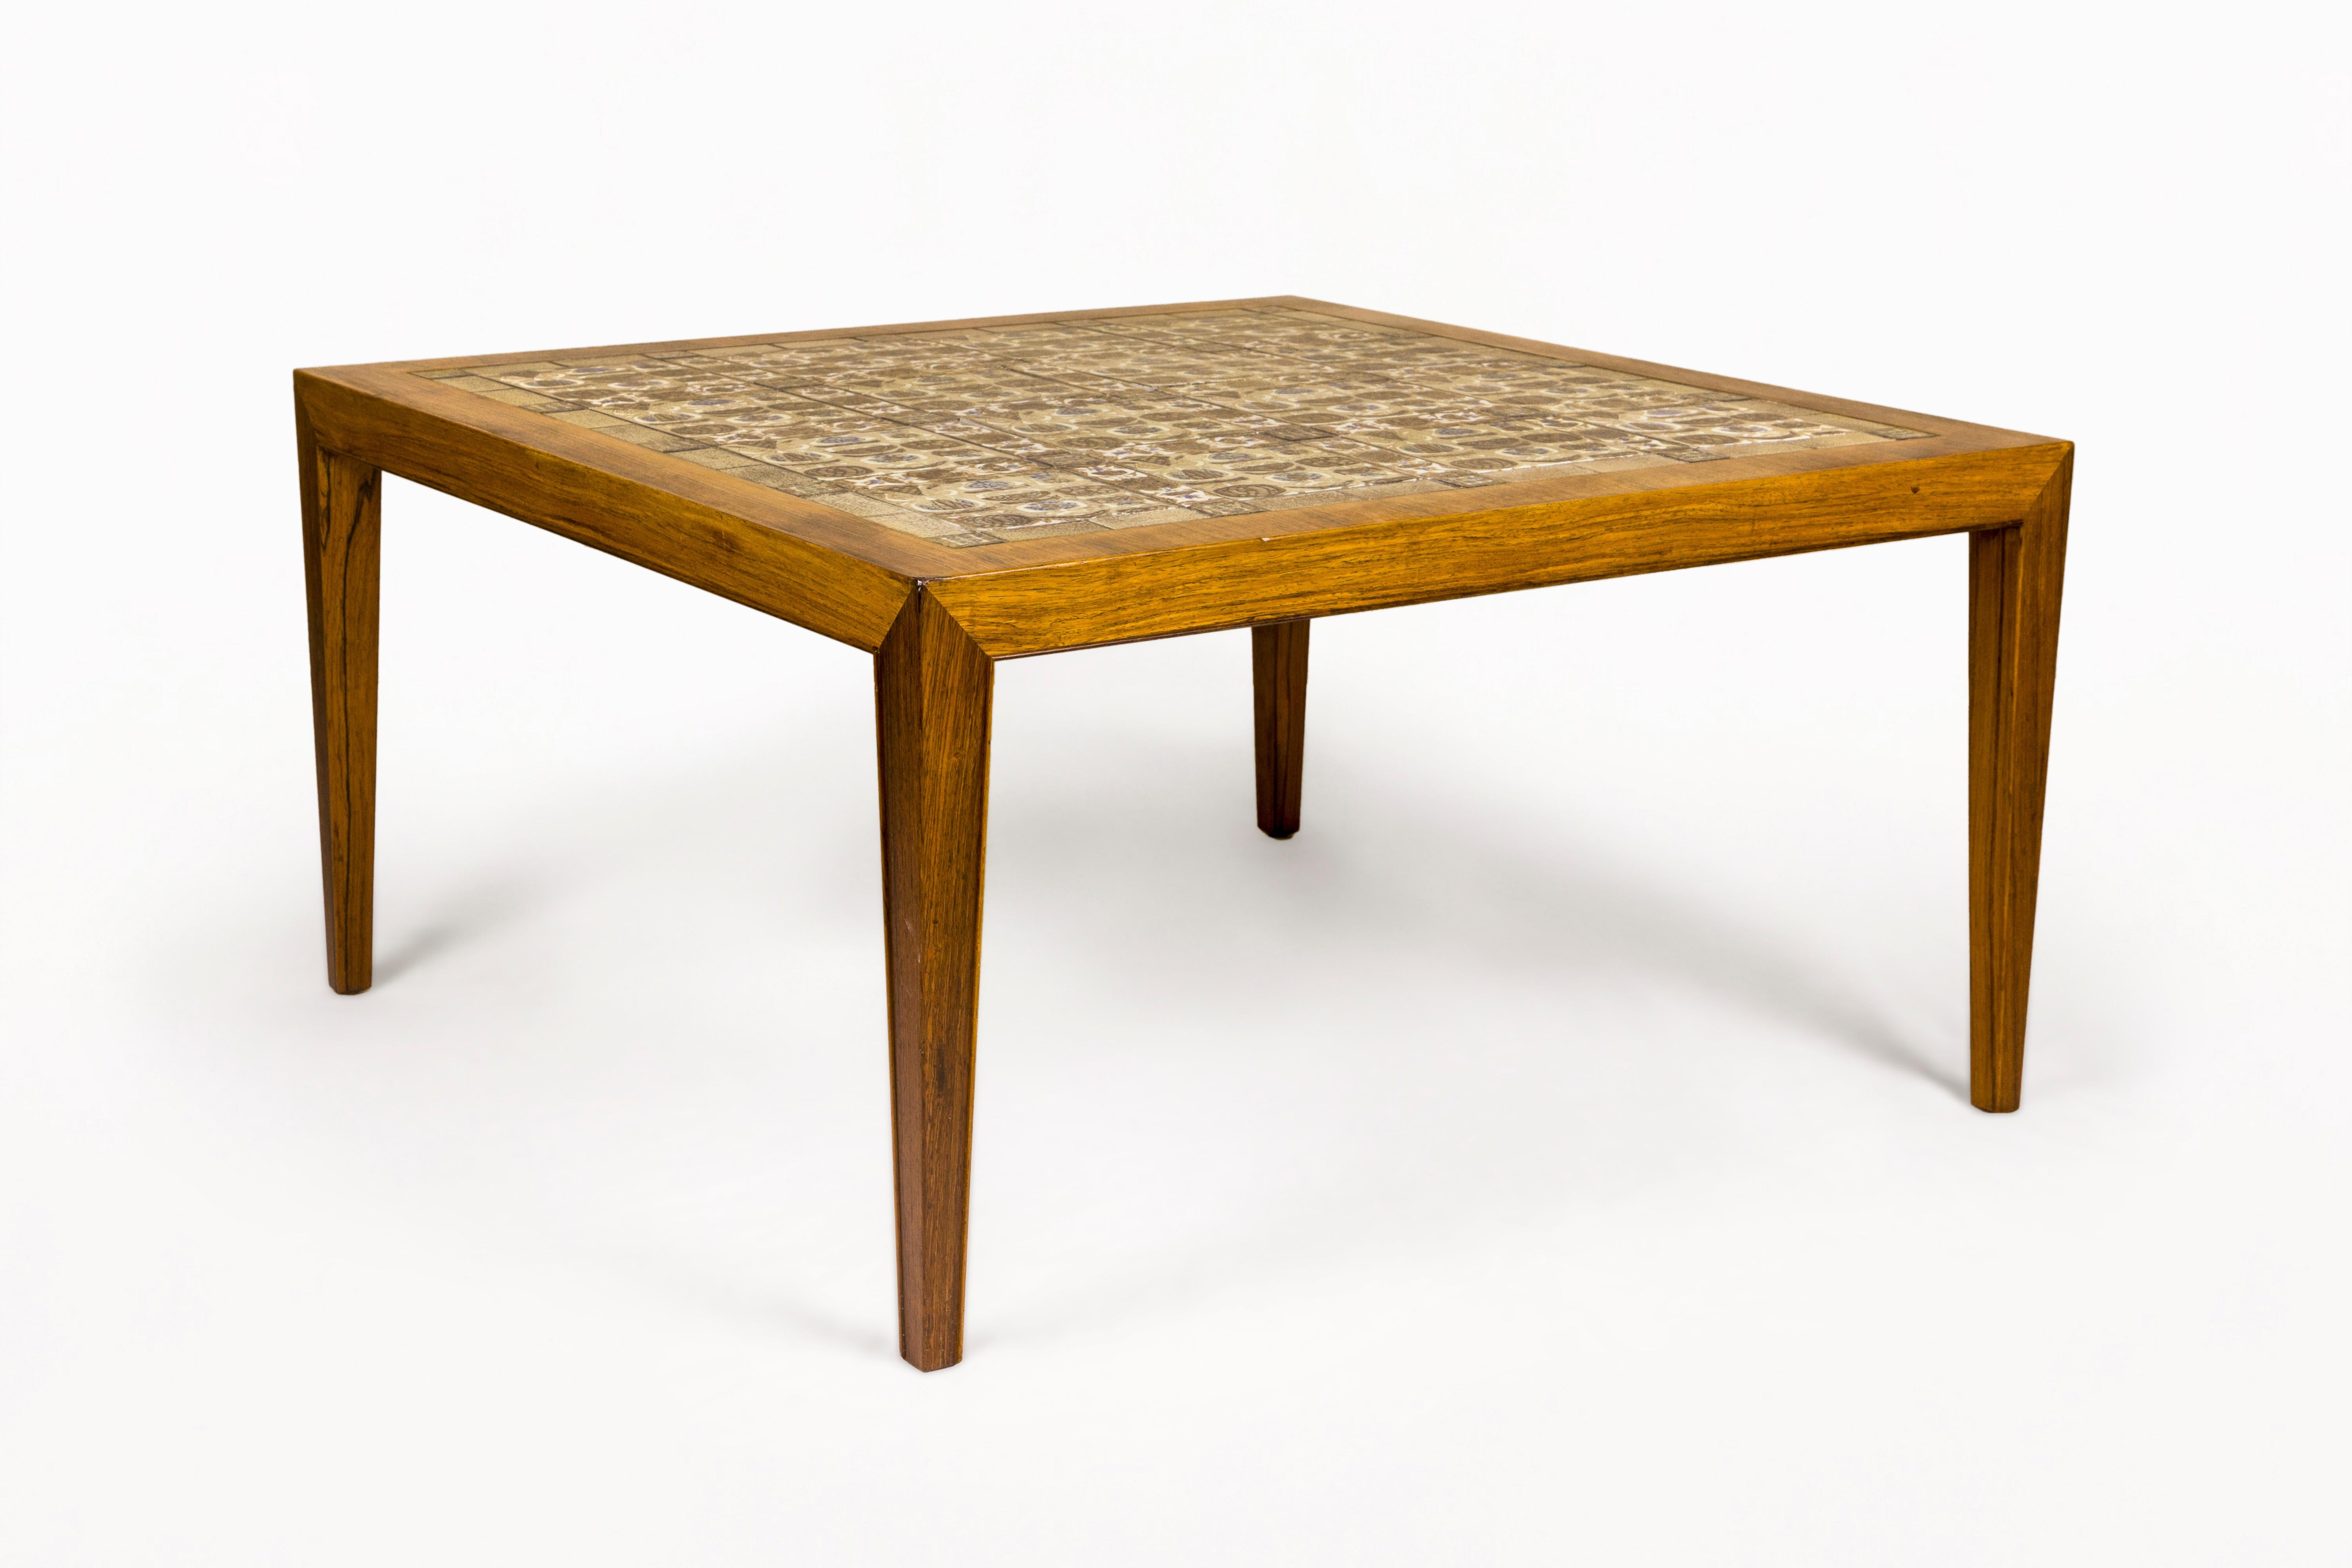 Severin Hansen Coffee Table.
Ceramic Tile Top and Wooden Base.
Very decorative.
circa 1960, Denmark.
Mid-Century Modern (MCM) is a design movement in interior, product, graphic design, architecture, and urban development that was popular from